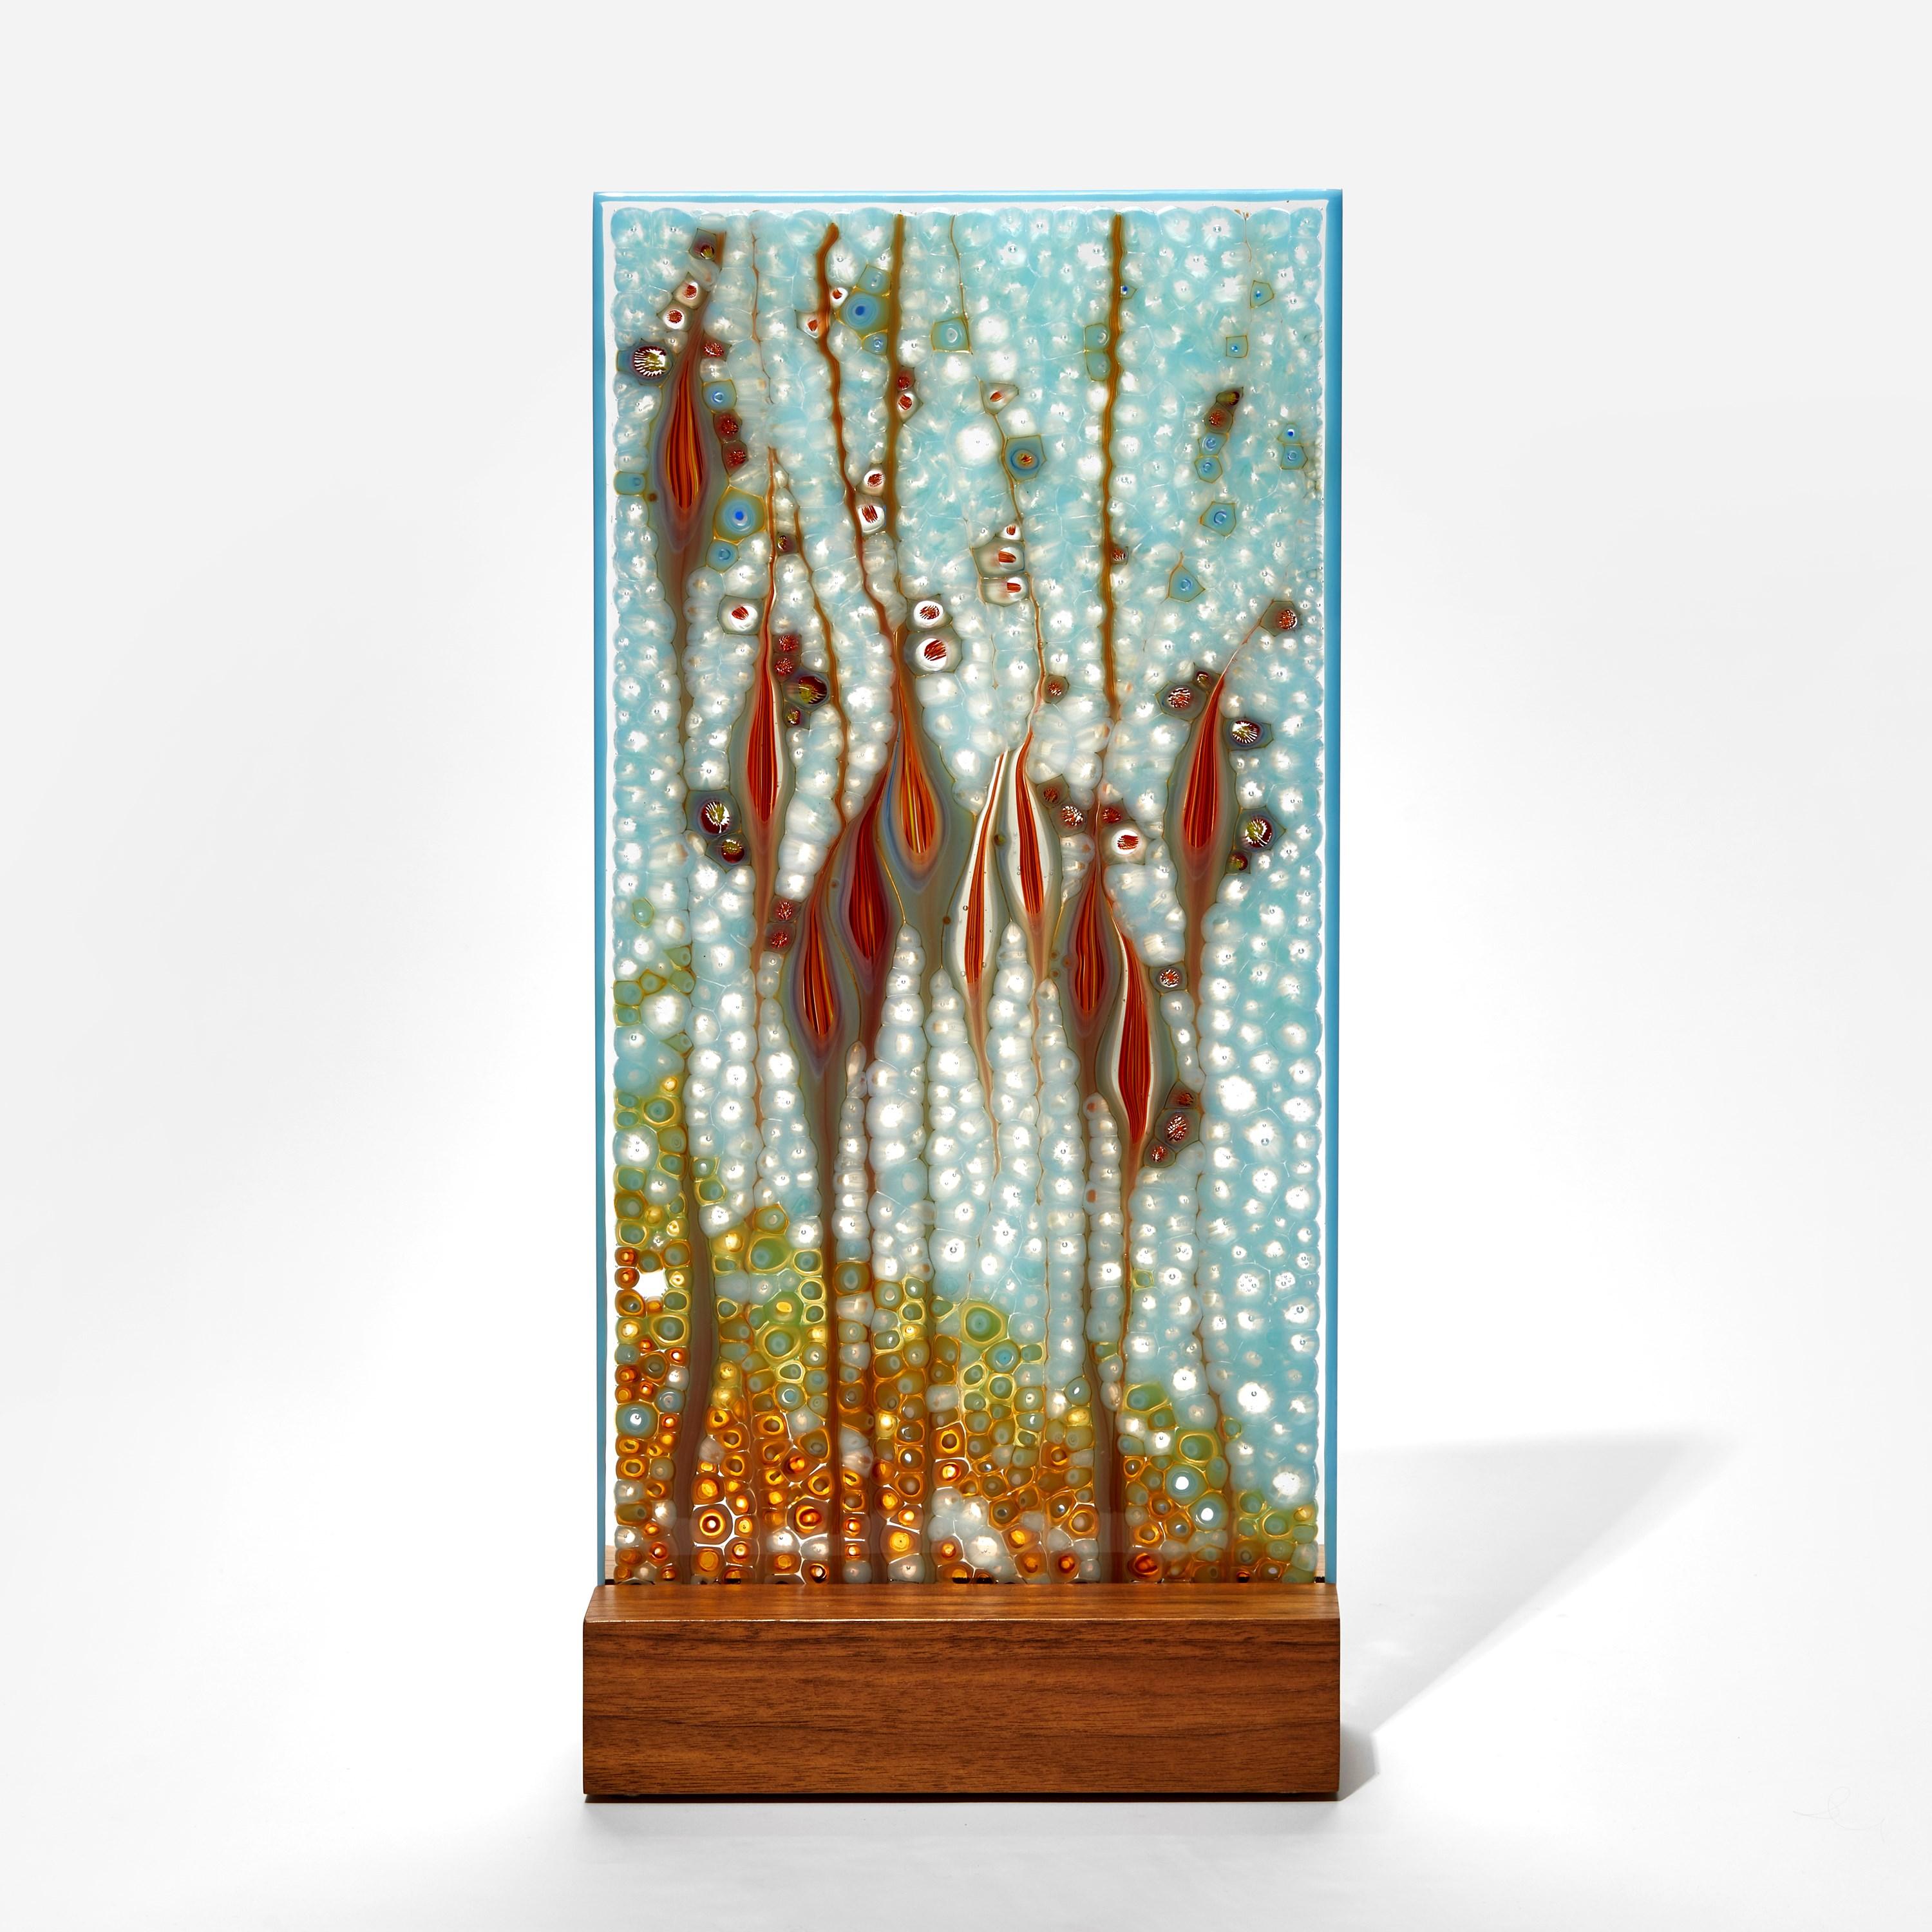 'Takamaka Opal', is a unique glass sculpture by the Austrian artist Sandra A. Fuchs, created in aqua, deep red and vibrant orange glass. Fuchs creates her own multi-colored and complex glass canes, which are then cut to create small 'murrina'. These